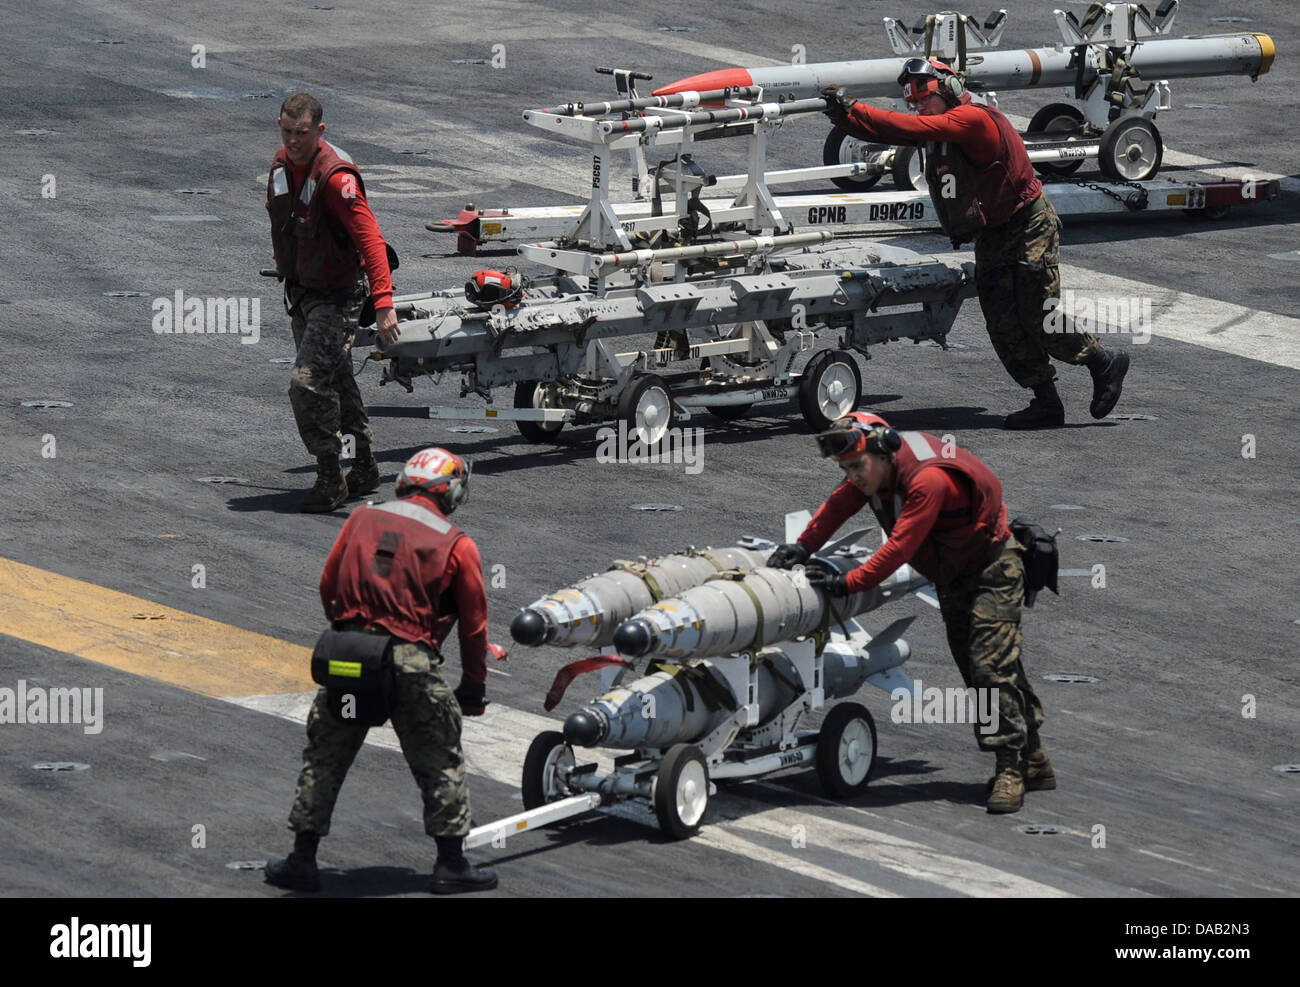 Aviation ordnancemen transport ordnance across the flight deck of the aircraft carrier USS Nimitz (CVN 68). The Nimitz Carrier Strike Group is deployed to the U.S. 5th Fleet area of responsibility conducting maritime security operations, theater security Stock Photo